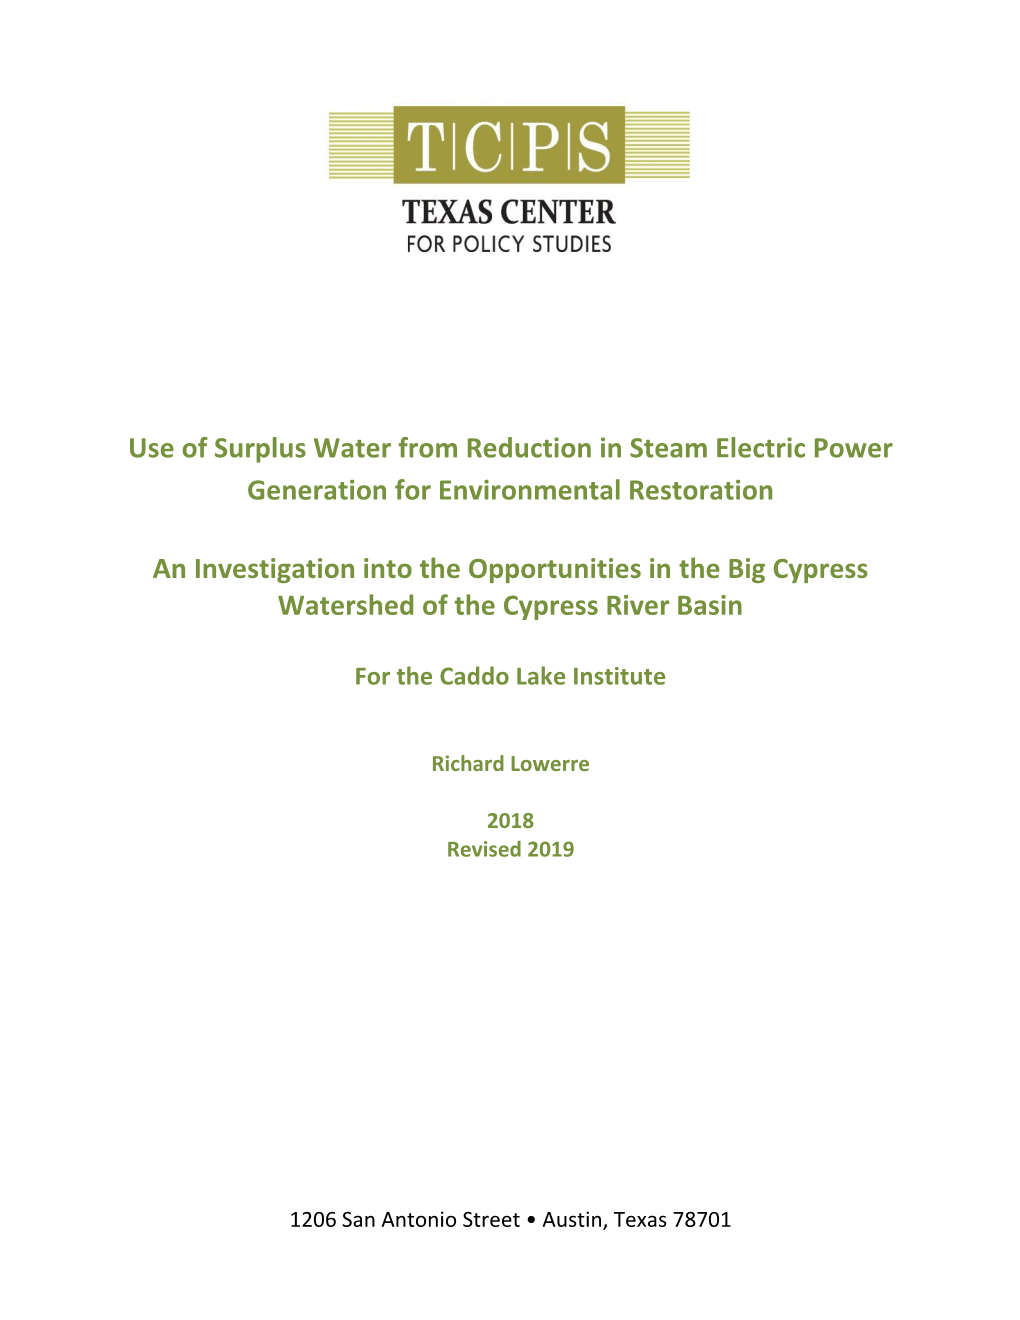 Use of Surplus Water from Reduction in Steam Electric Power Generation for Environmental Restoration an Investigation Into the O